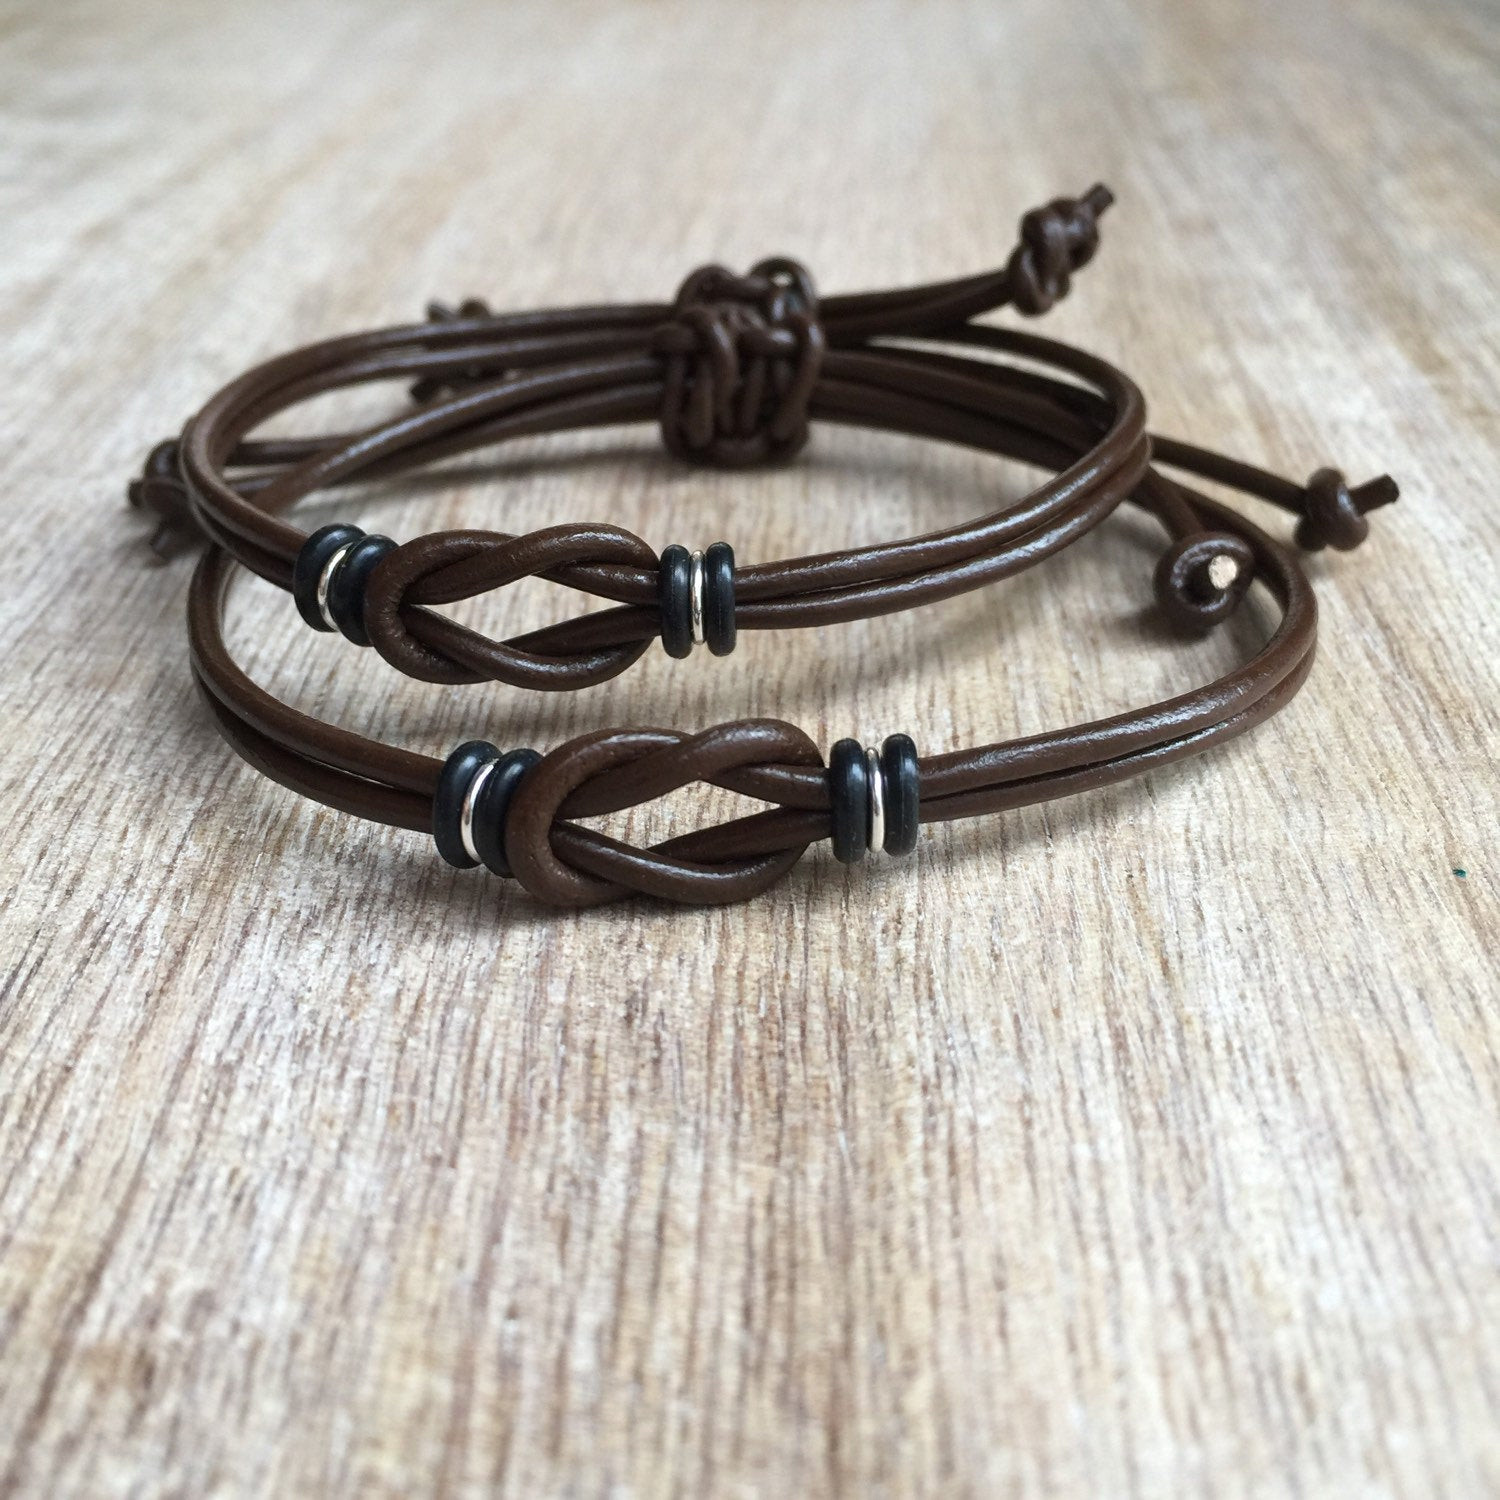 Couple Bracelets Leather
 Couples Bracelets His and her Bracelet Chocolate Leather